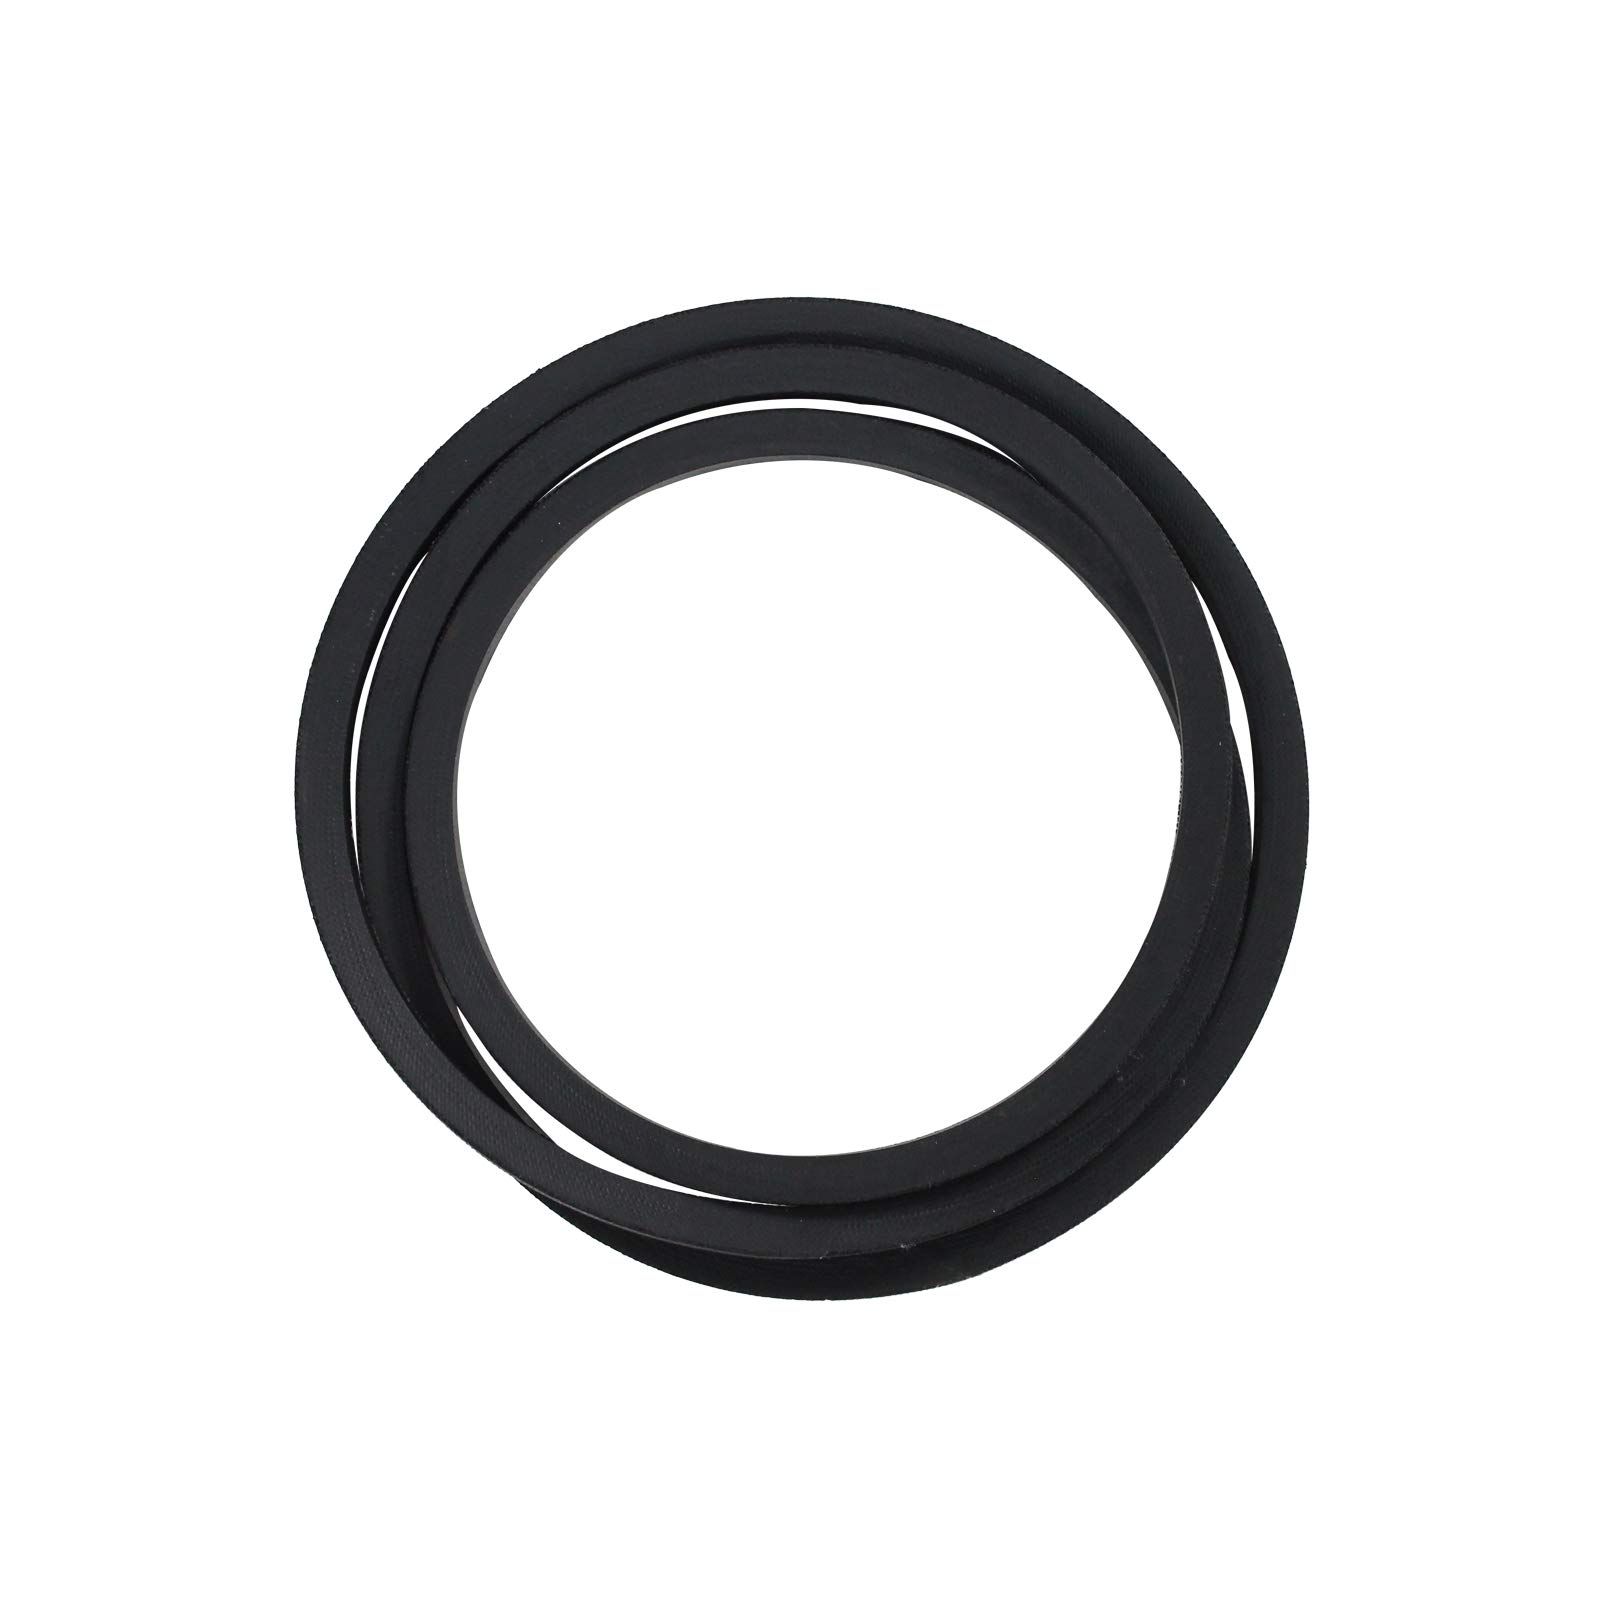 UpStart Components 539110411 Ground Drive Belt Replacement for Husqvarna RZ 46I (967277601-00) (2014-01) Zero Turn: Consumer - Compatible with 110411 Belt